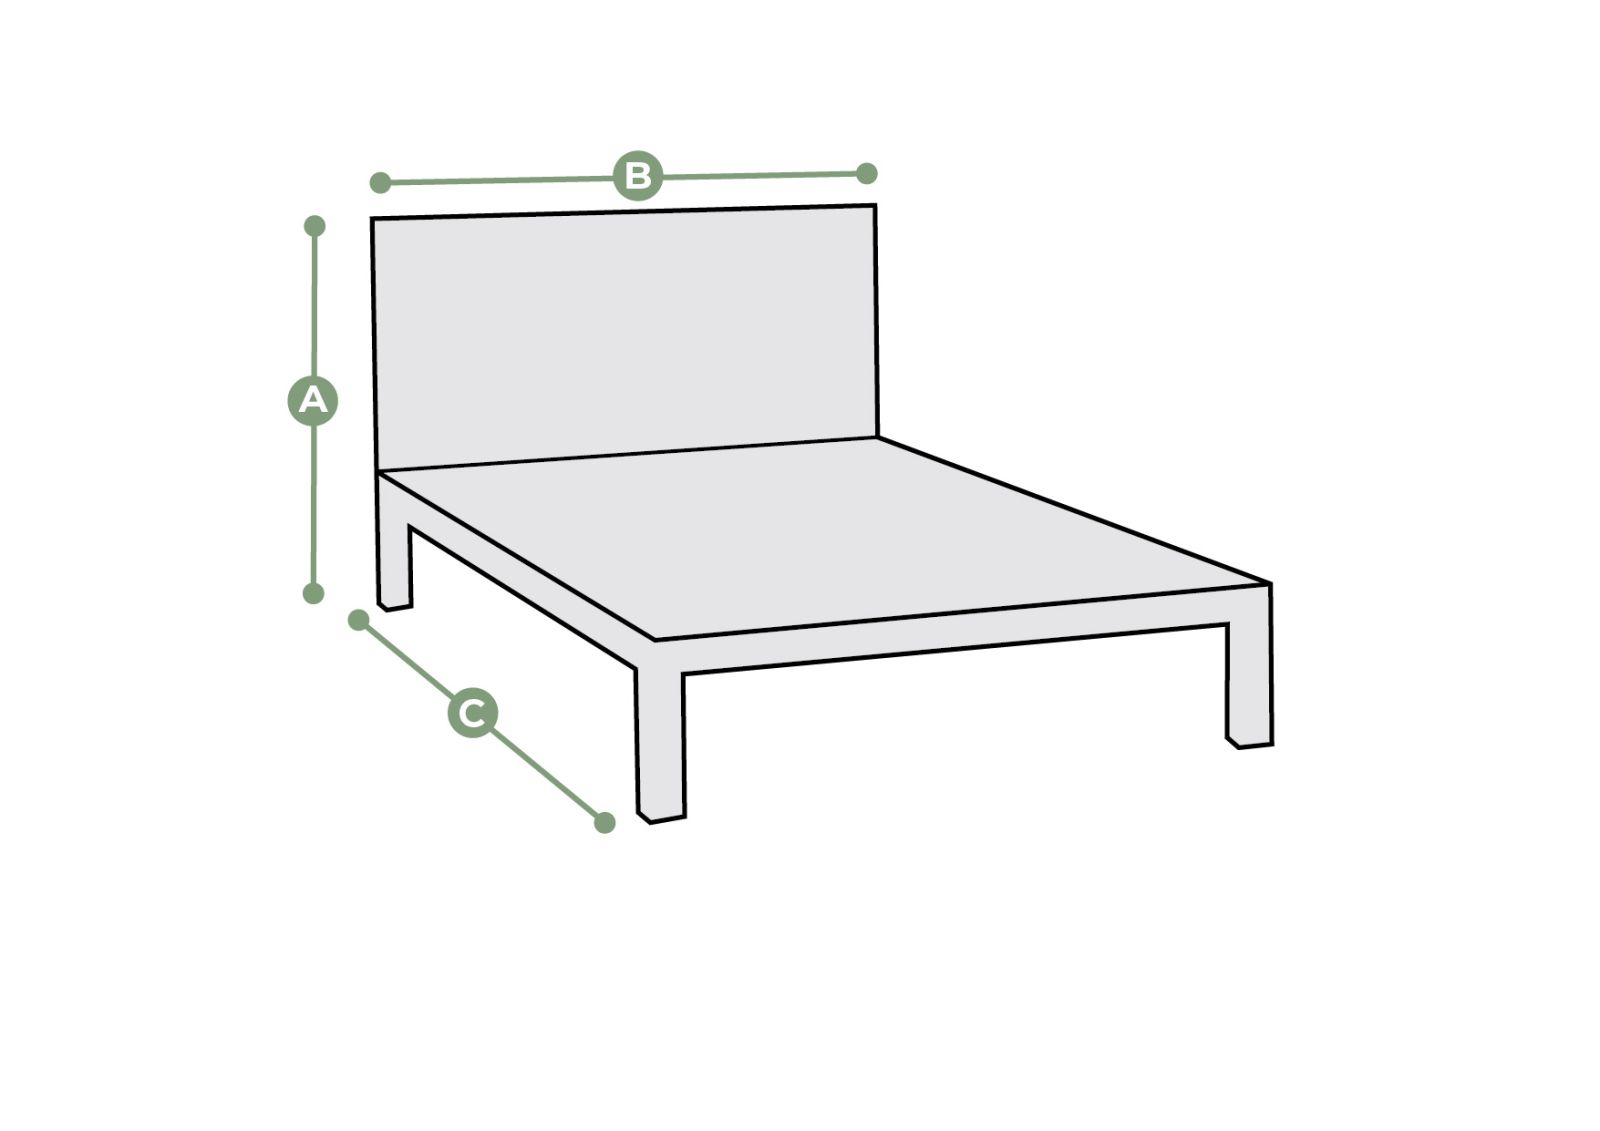 Penryn King-Size Bed Dimensions